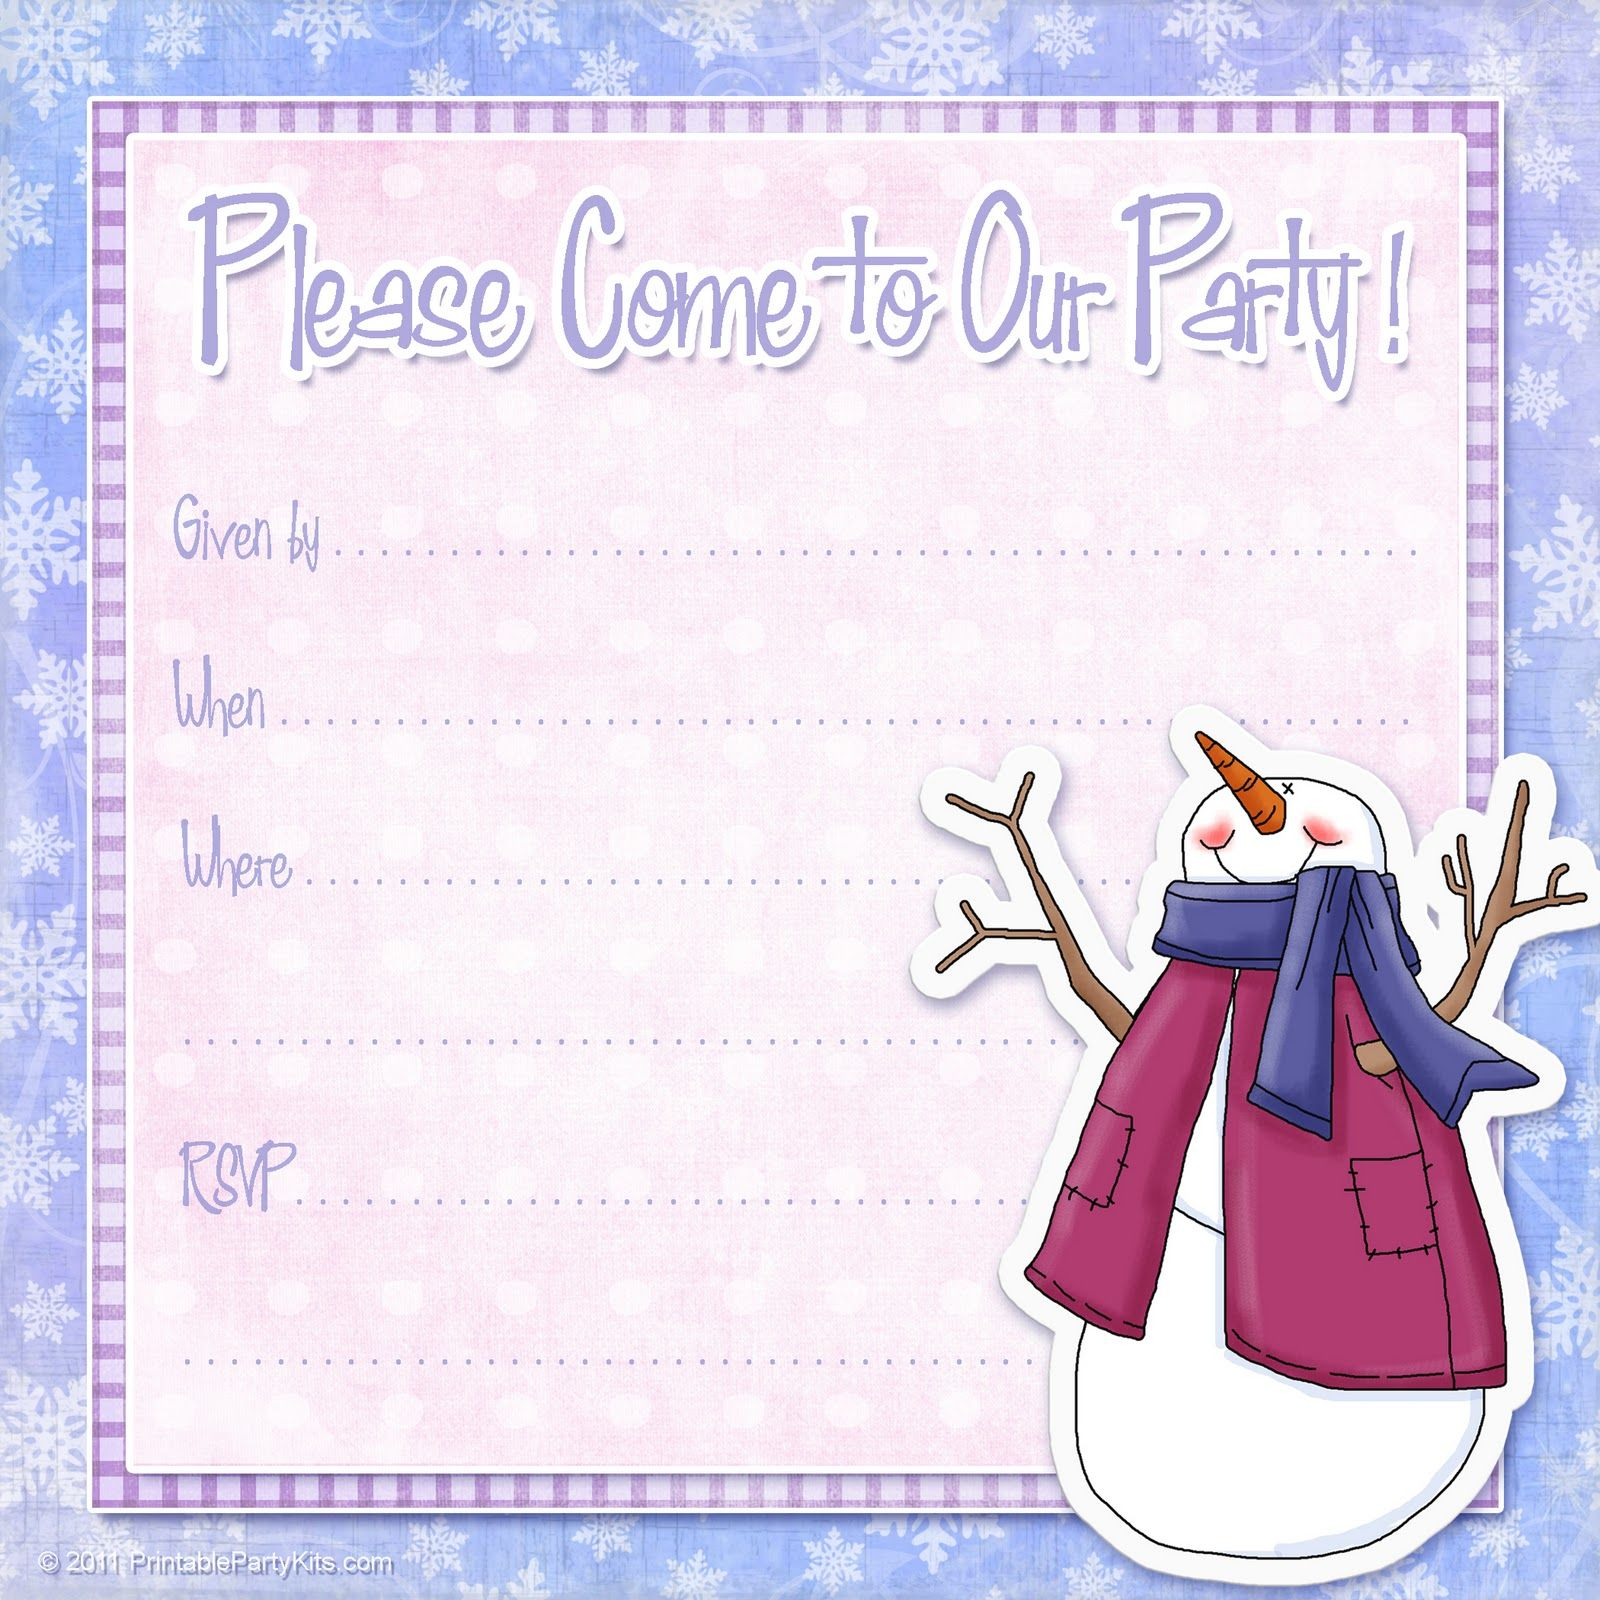 Free Printable Party Invitations Free Snowman Invite Template For A pertaining to sizing 1600 X 1600